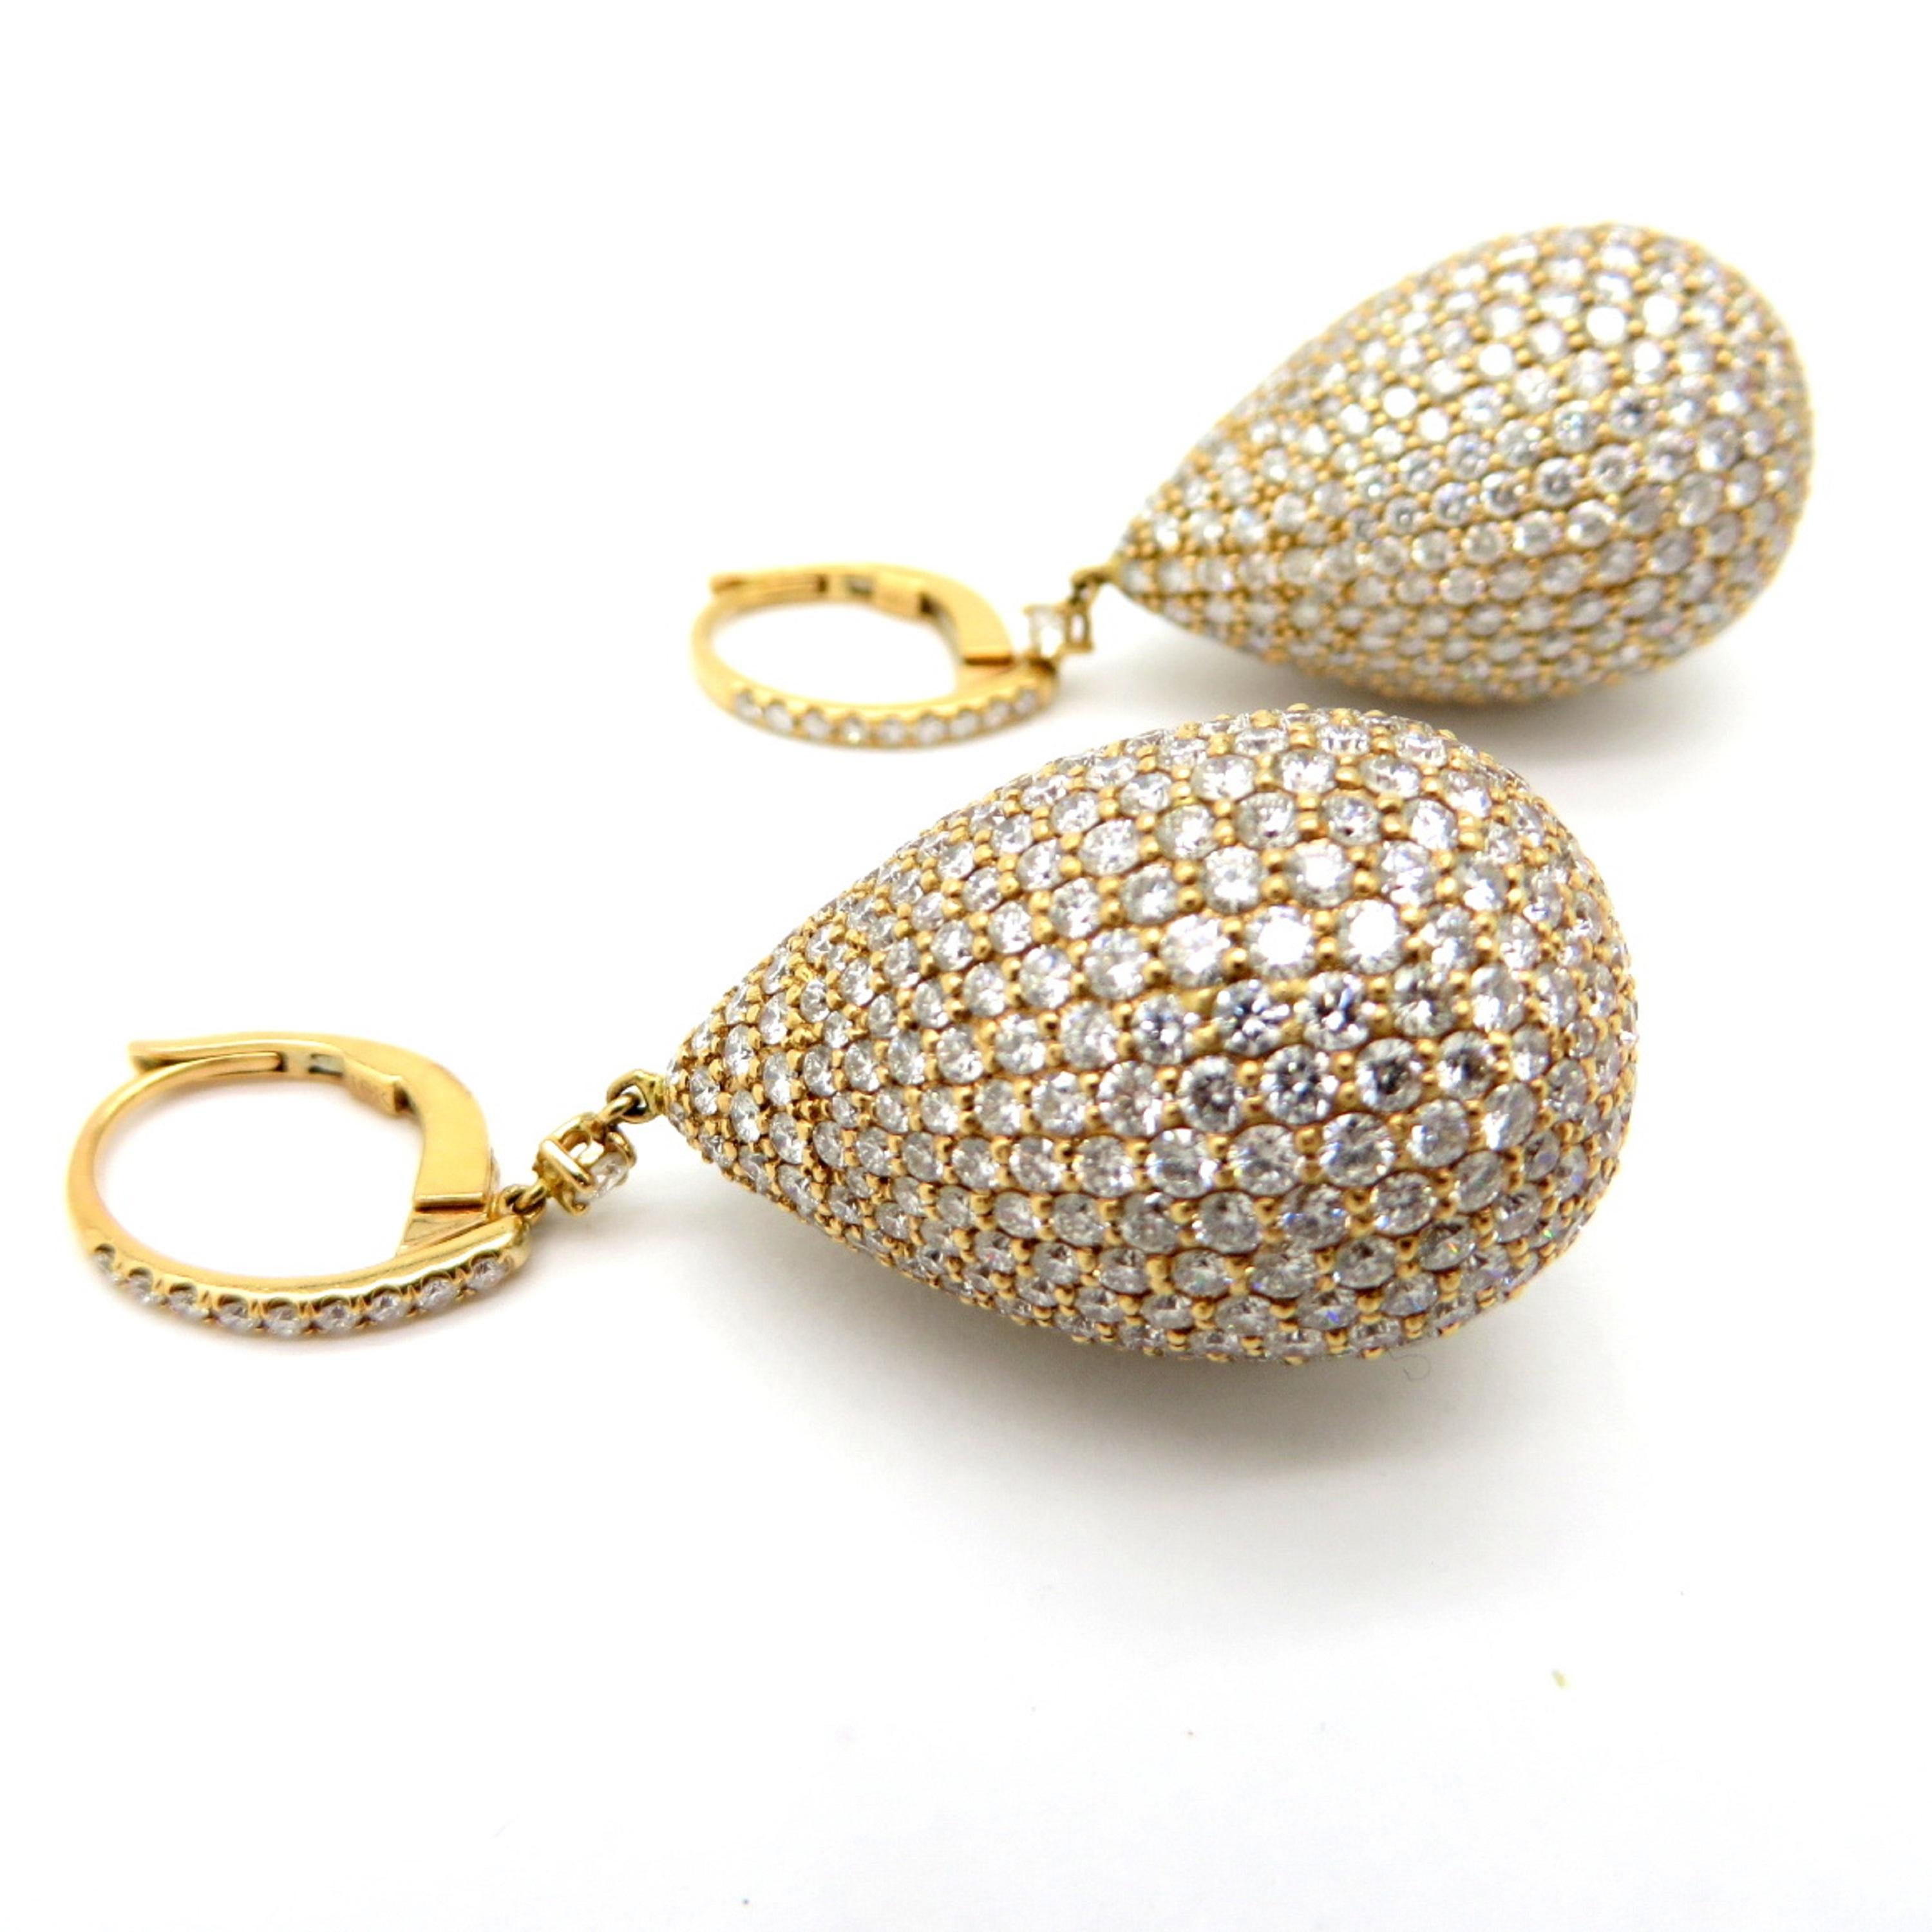 For sale is a gorgeous pair of round diamond pave earrings in a teardrop design!
The earrings are crafted out of 18K solid rose gold.
Showcasing 938 round brilliant cut diamonds, with various measurements, weighing a combined total weight of 14.96